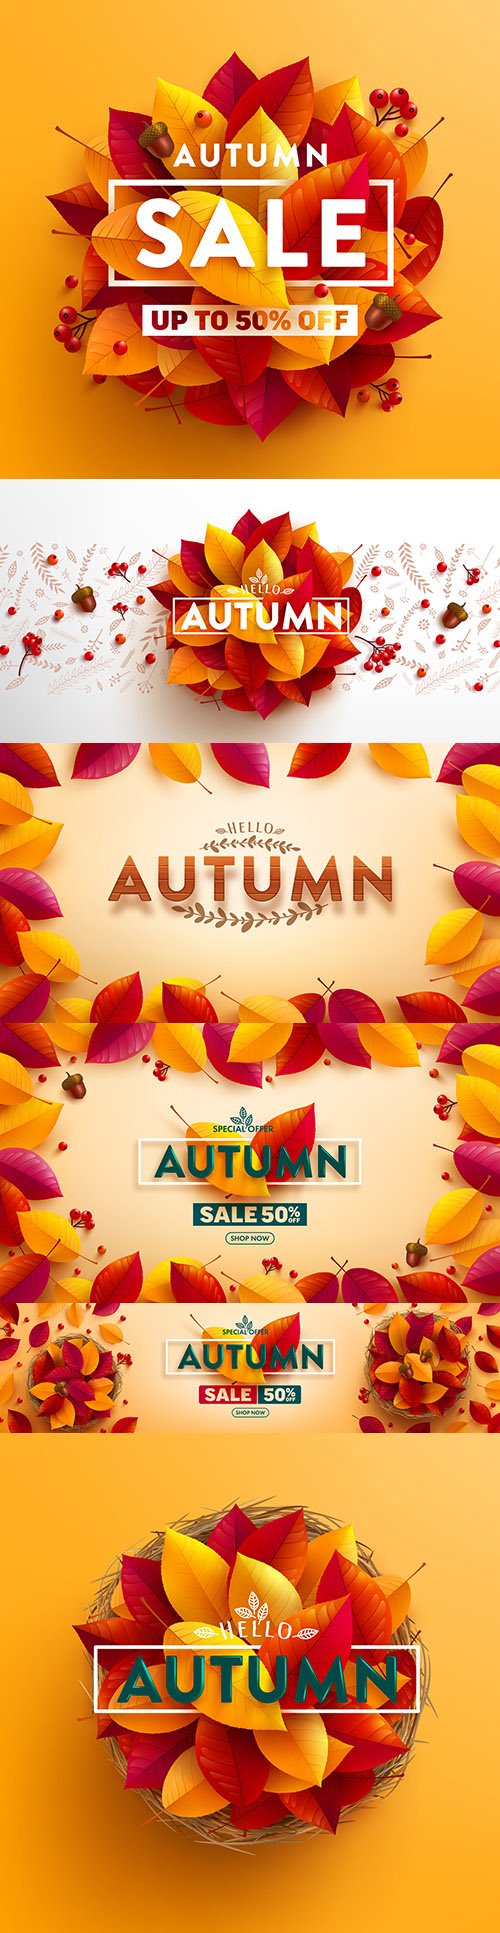 Autumn sale poster and banner with autumn multi-colored leaves